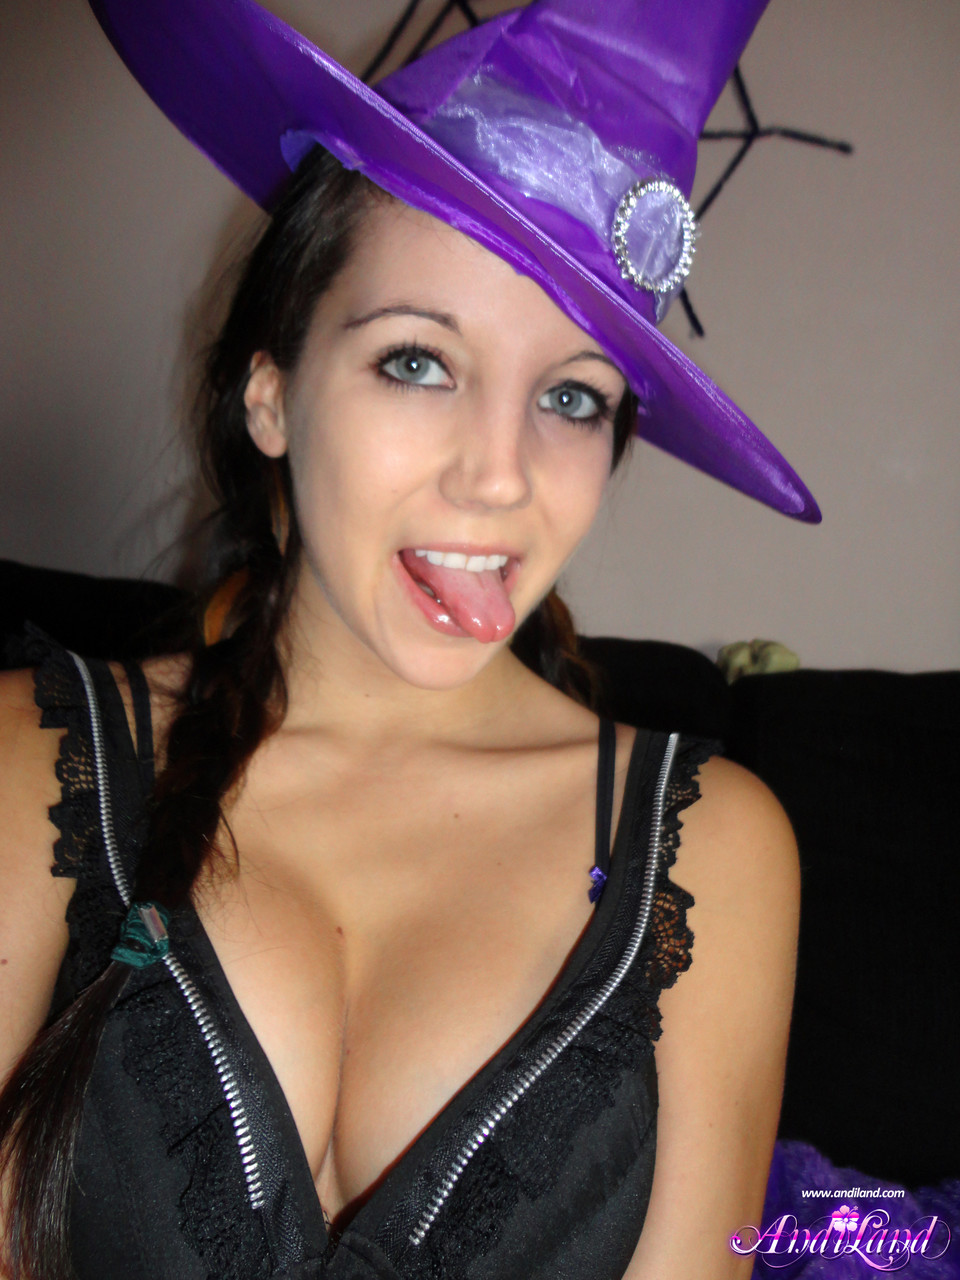 Teen amateur Andi Land teases during upskirt action in a Halloween outfit foto porno #428432669